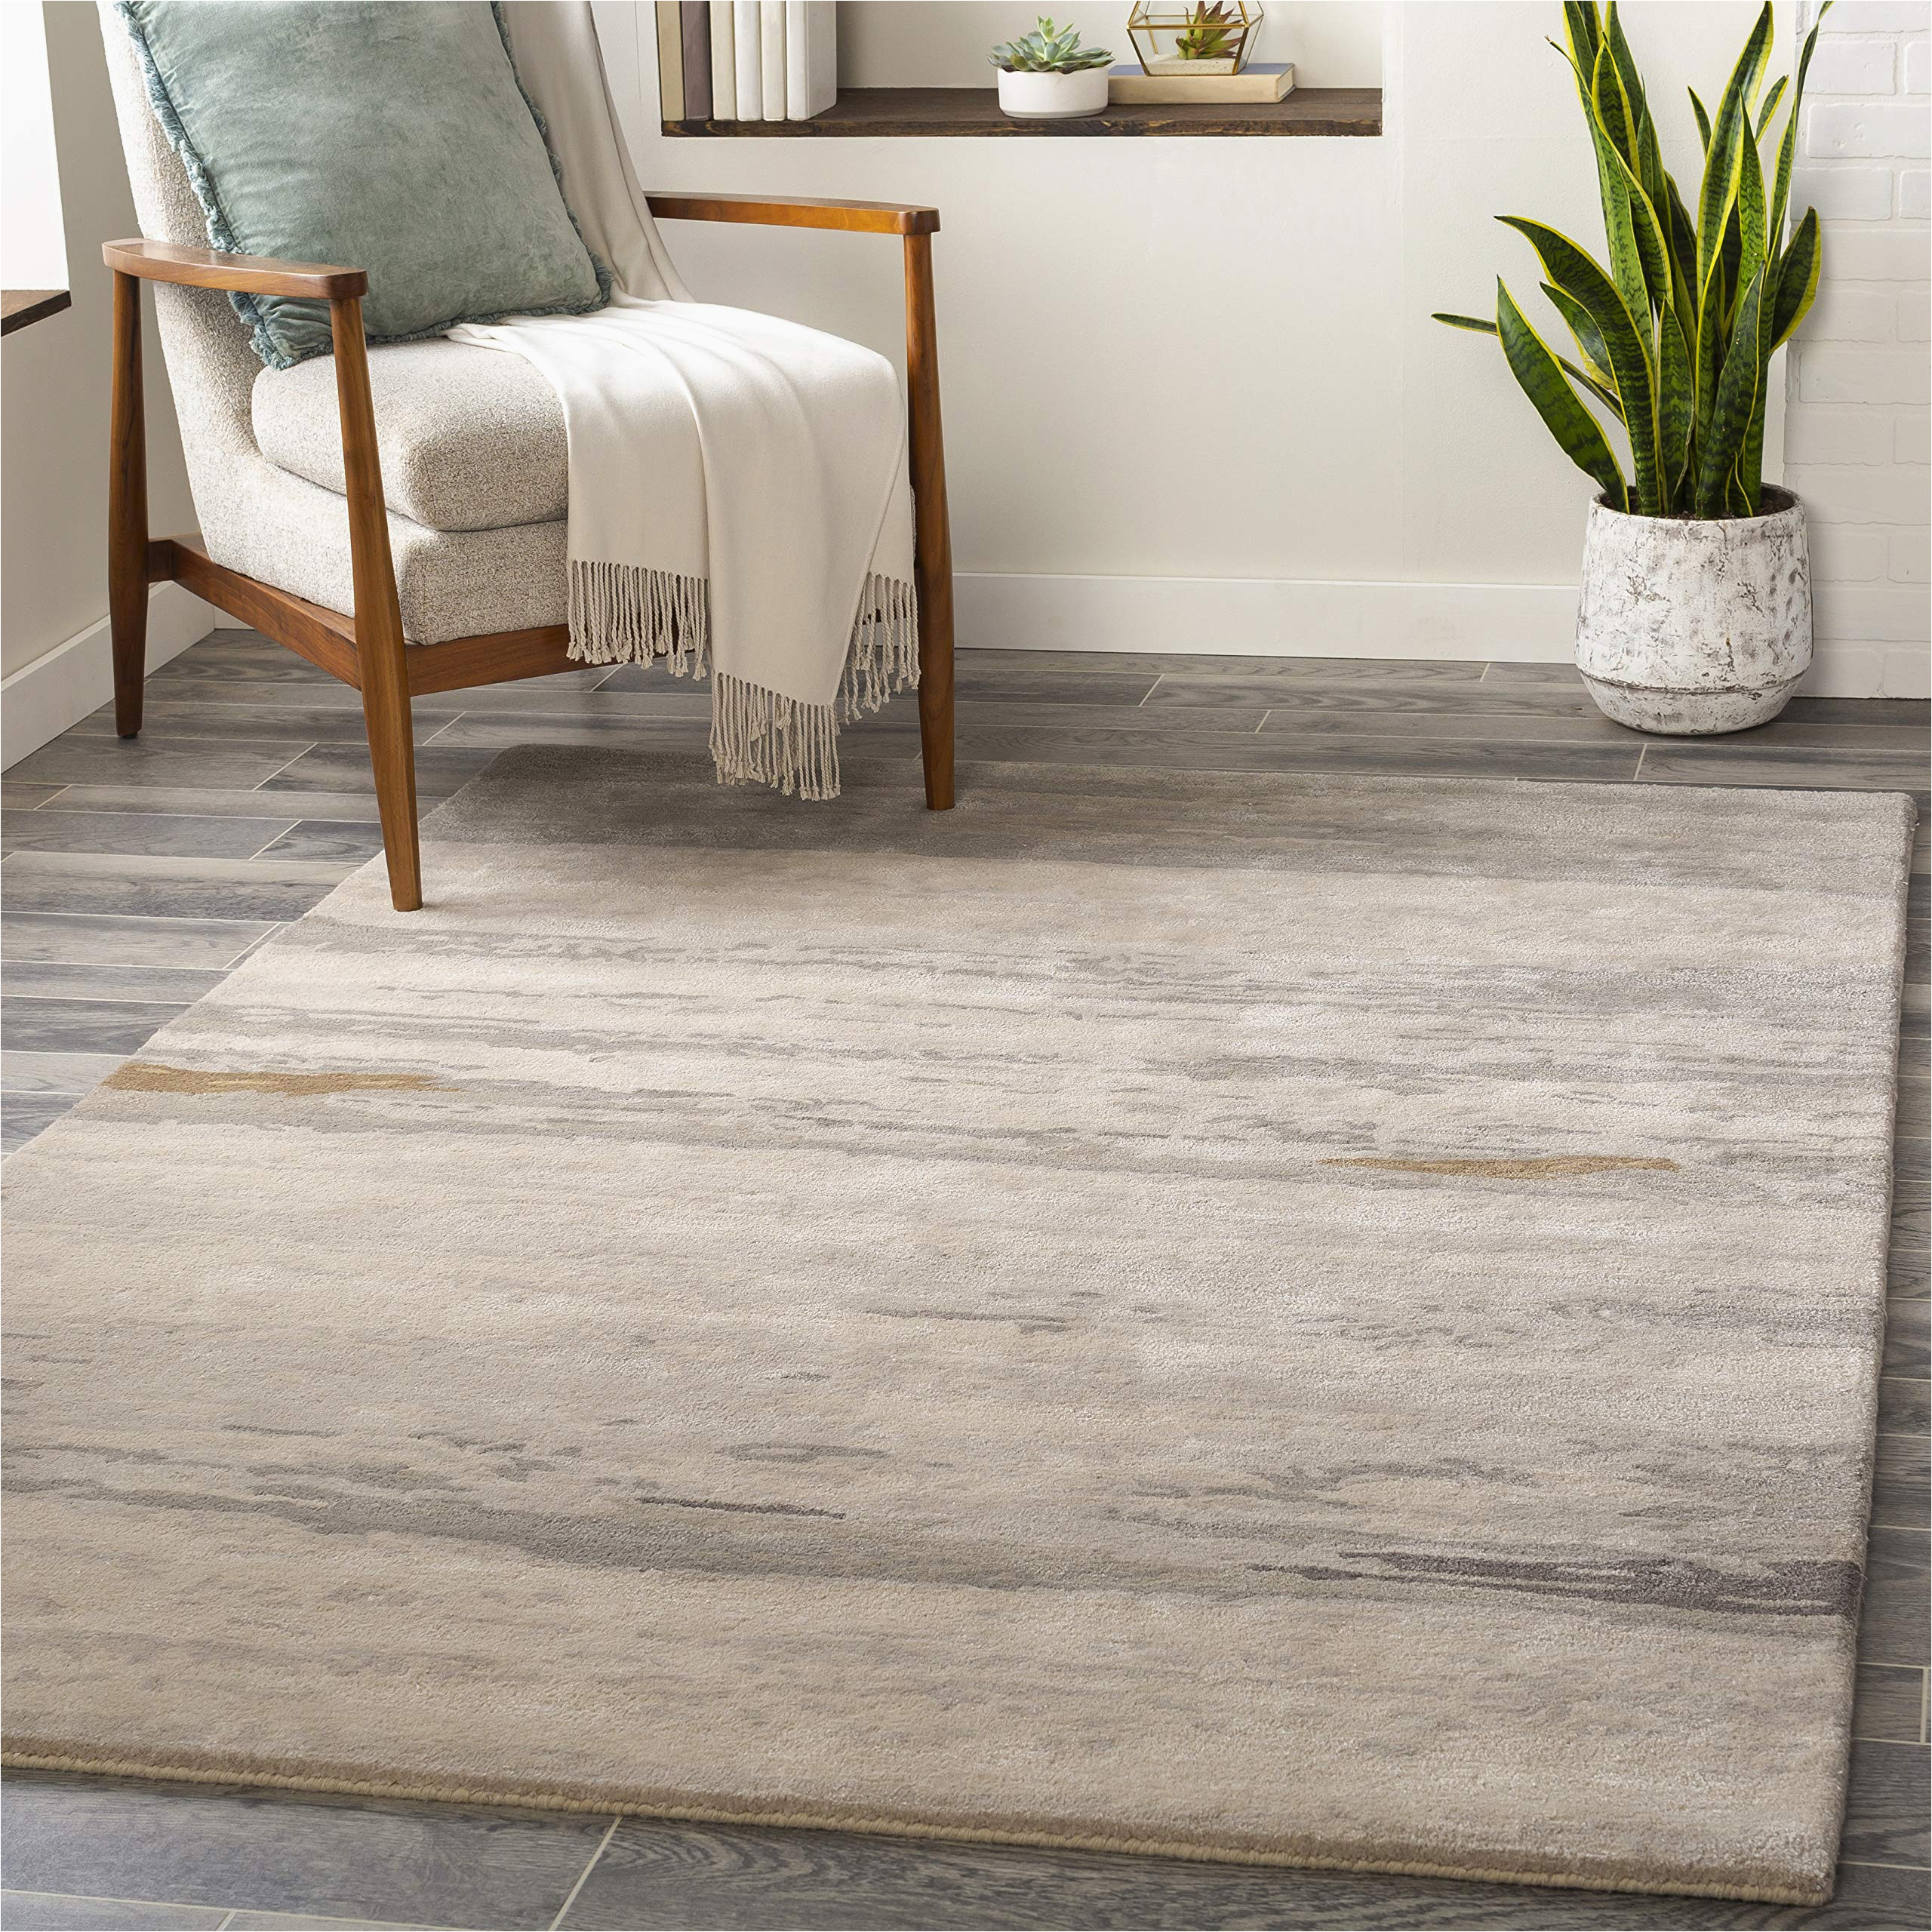 Light Gray area Rug 10×14 Mark&day area Rugs, 10×14 Barradeel Modern Light Gray area Rug Gray Cream White Carpet for Living Room, Bedroom or Kitchen (10′ X 14′)